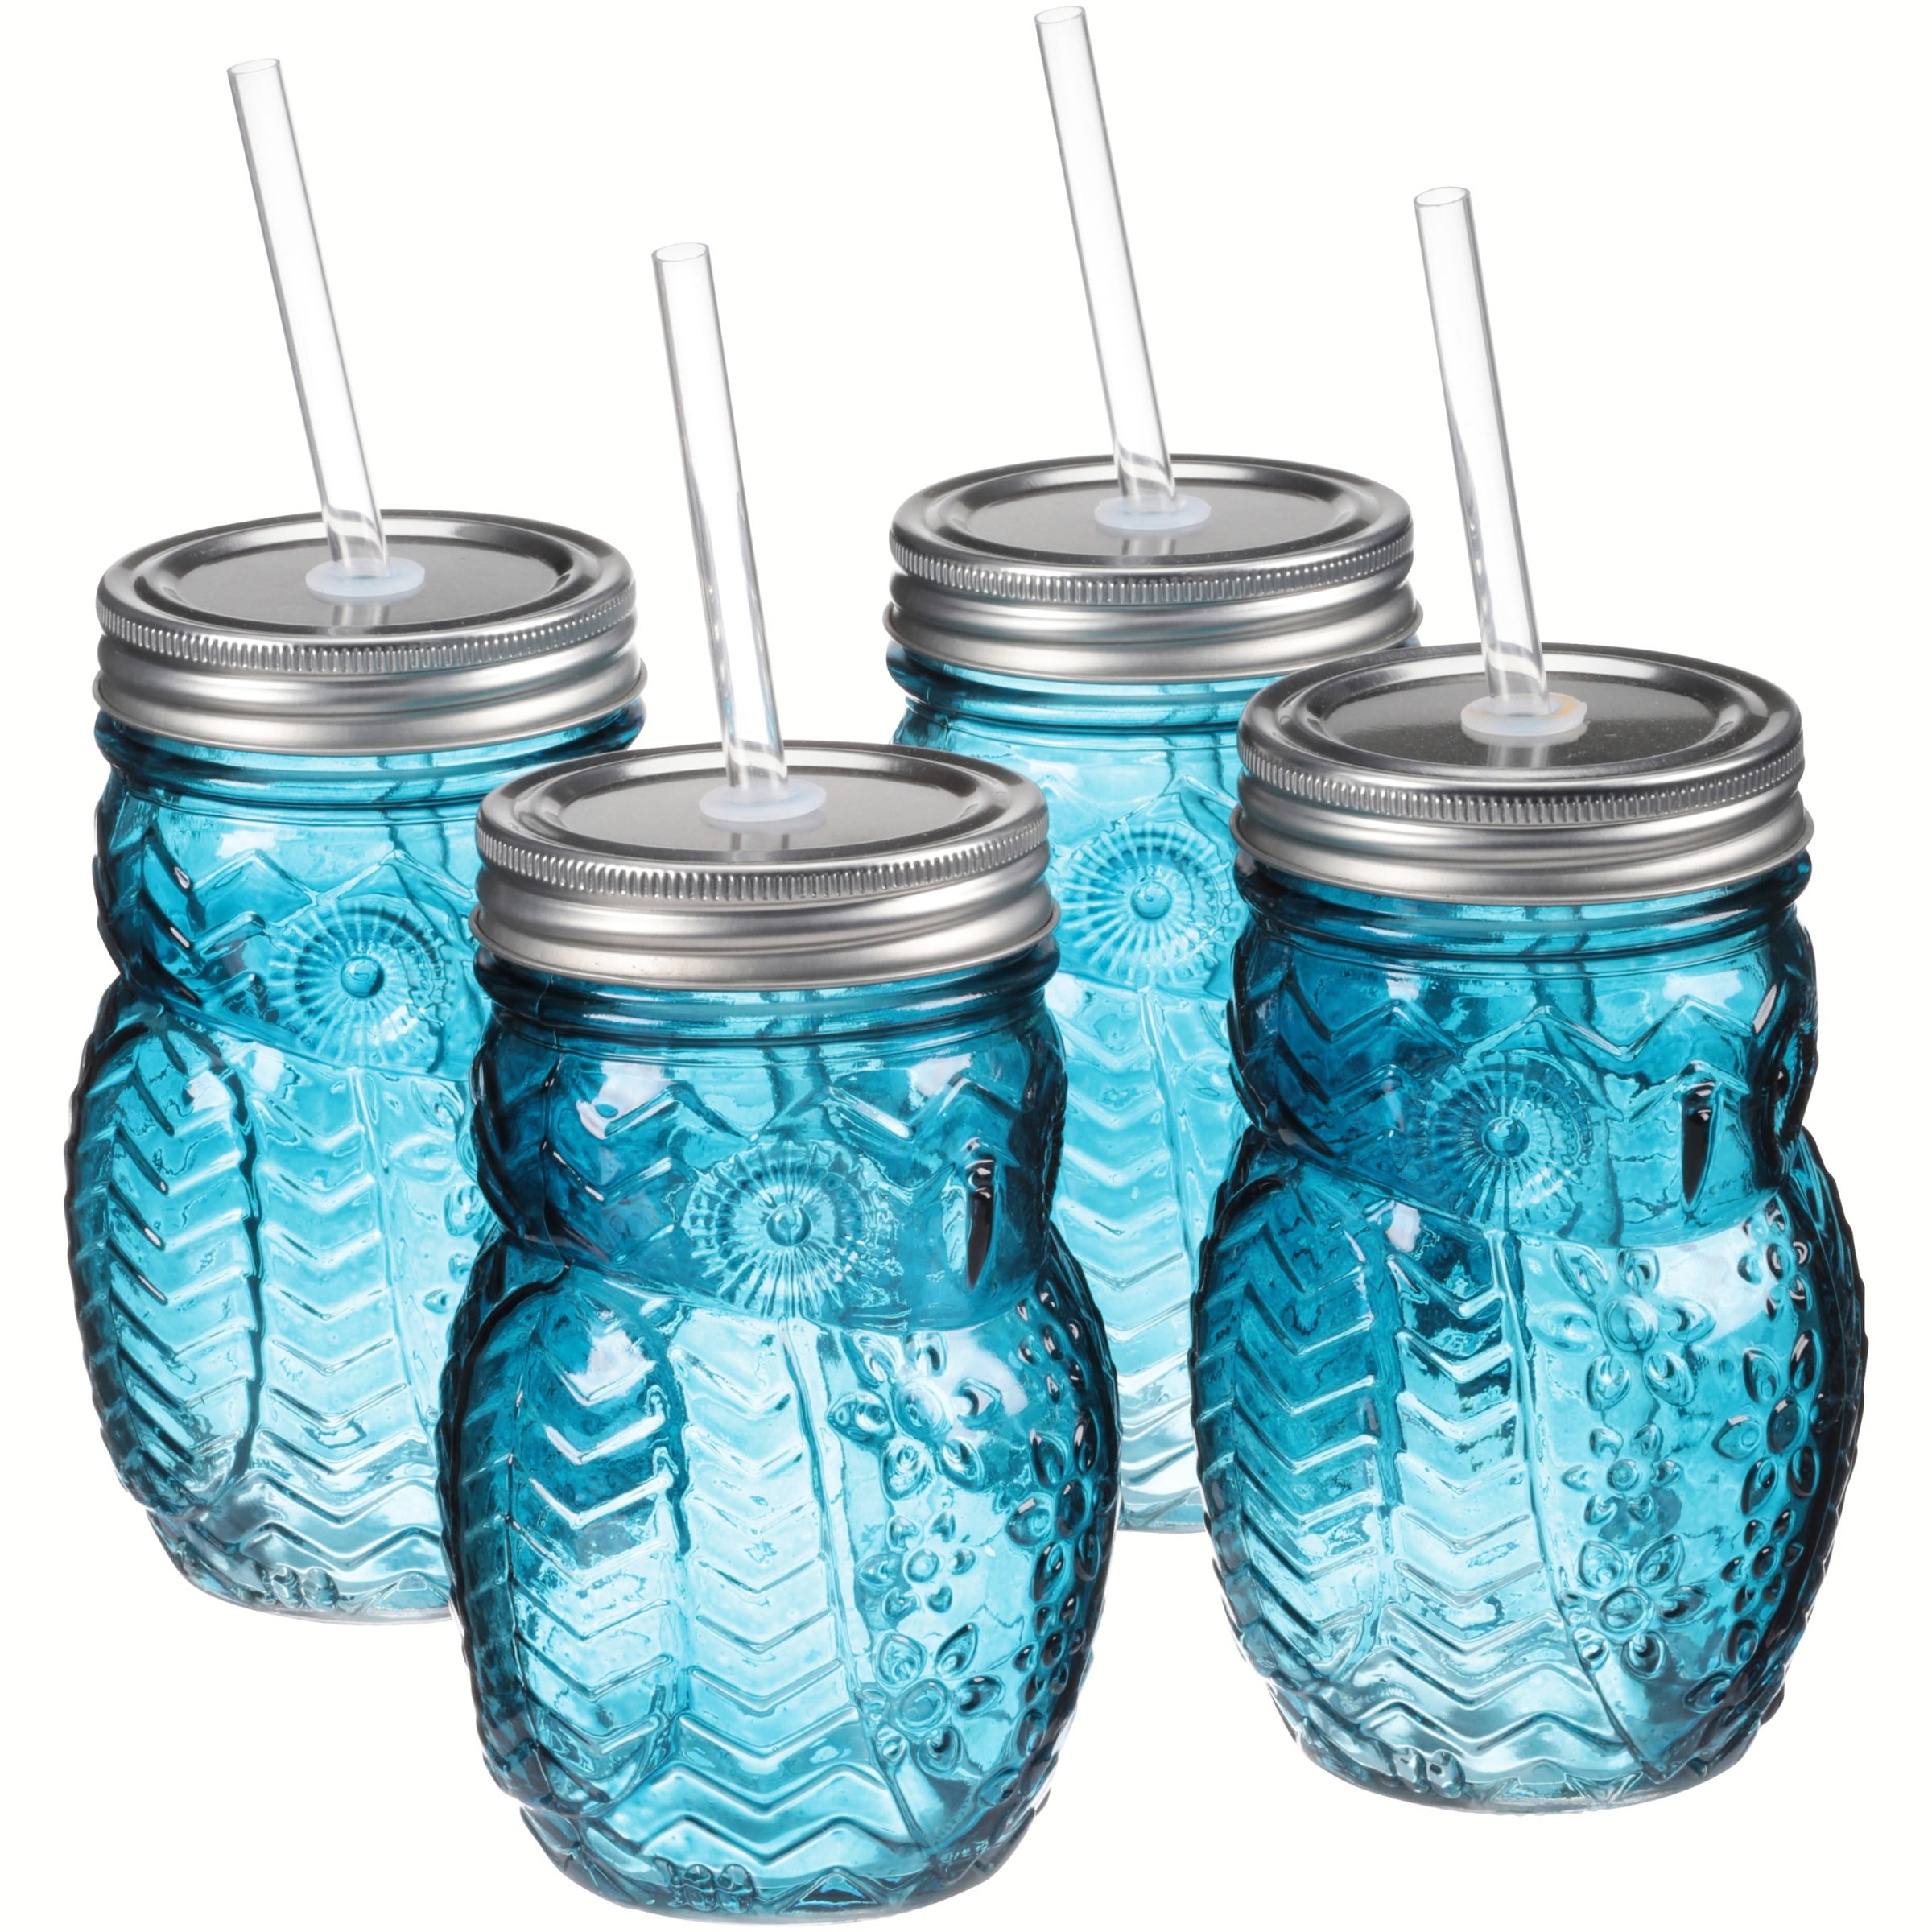 Clear 15 oz Glassware for Water Beer and Kitchen & Home Decor Bar Dining Beverage Gifts Circleware 69049 Owl Mason Jars Drinking Glasses with Metal Lids and Hard Plastic Straws Set of 4 